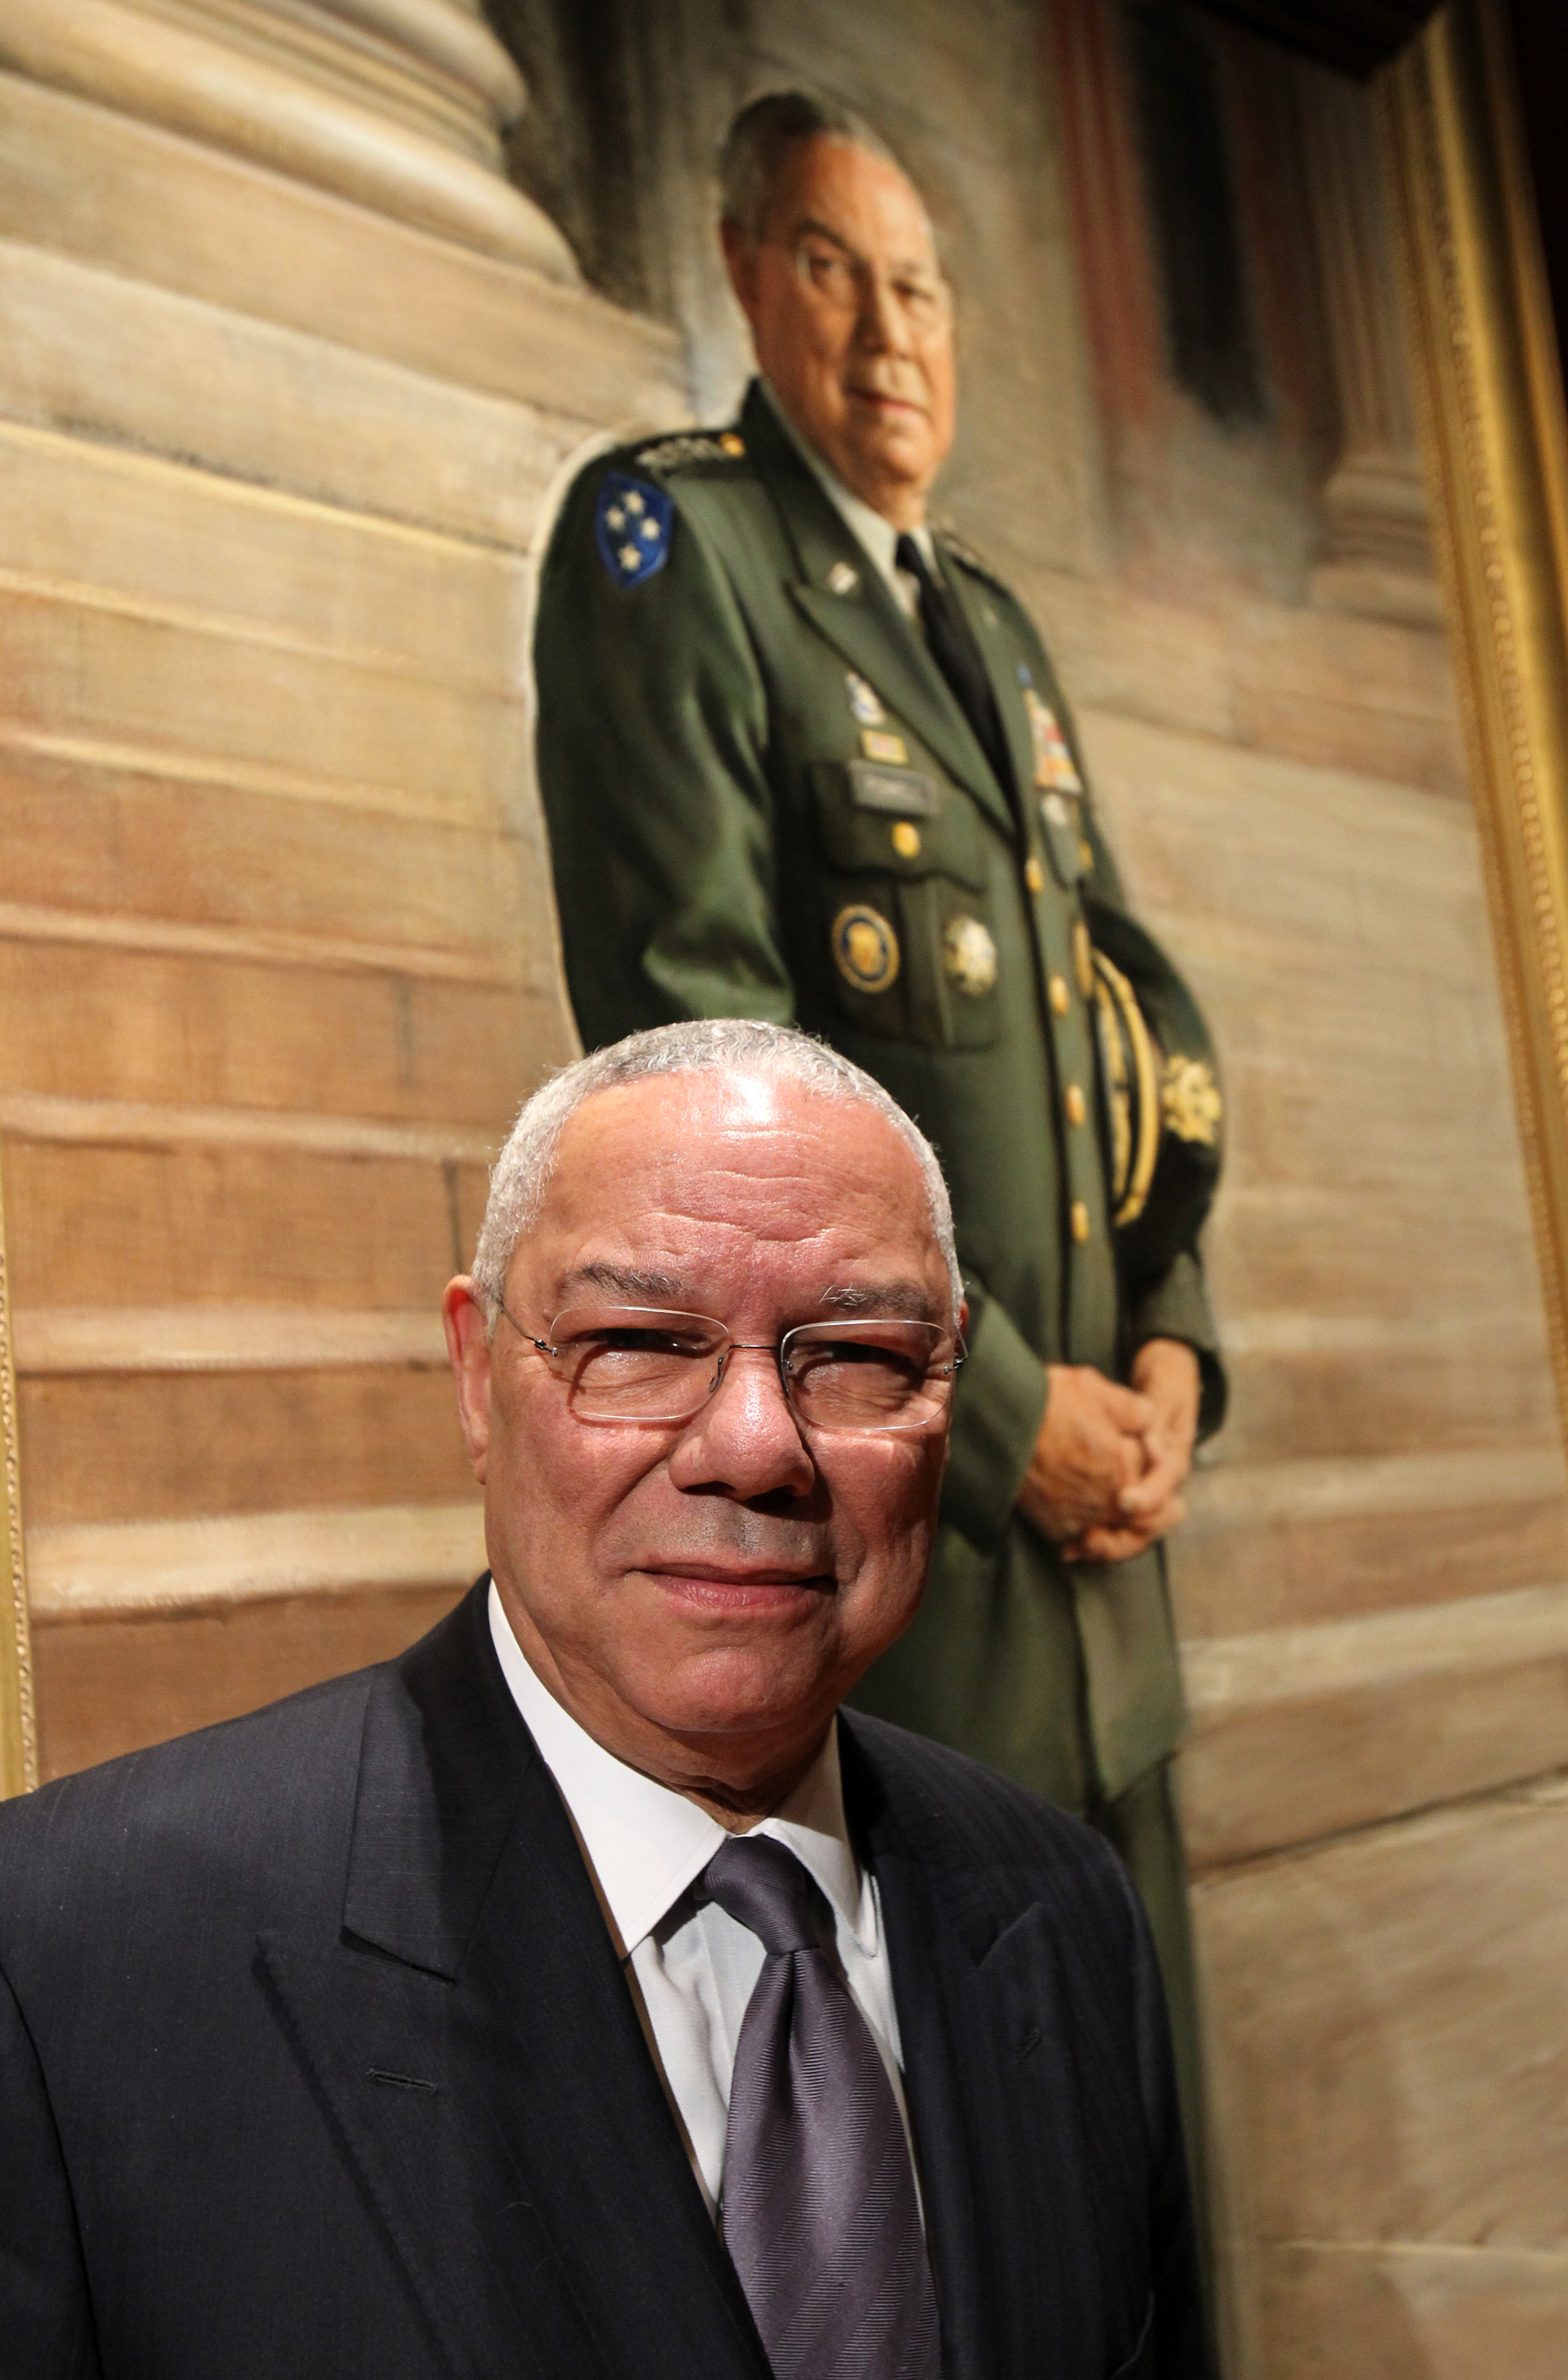 General Colin Powell Portrait Event 1 | Smithsonian Institution